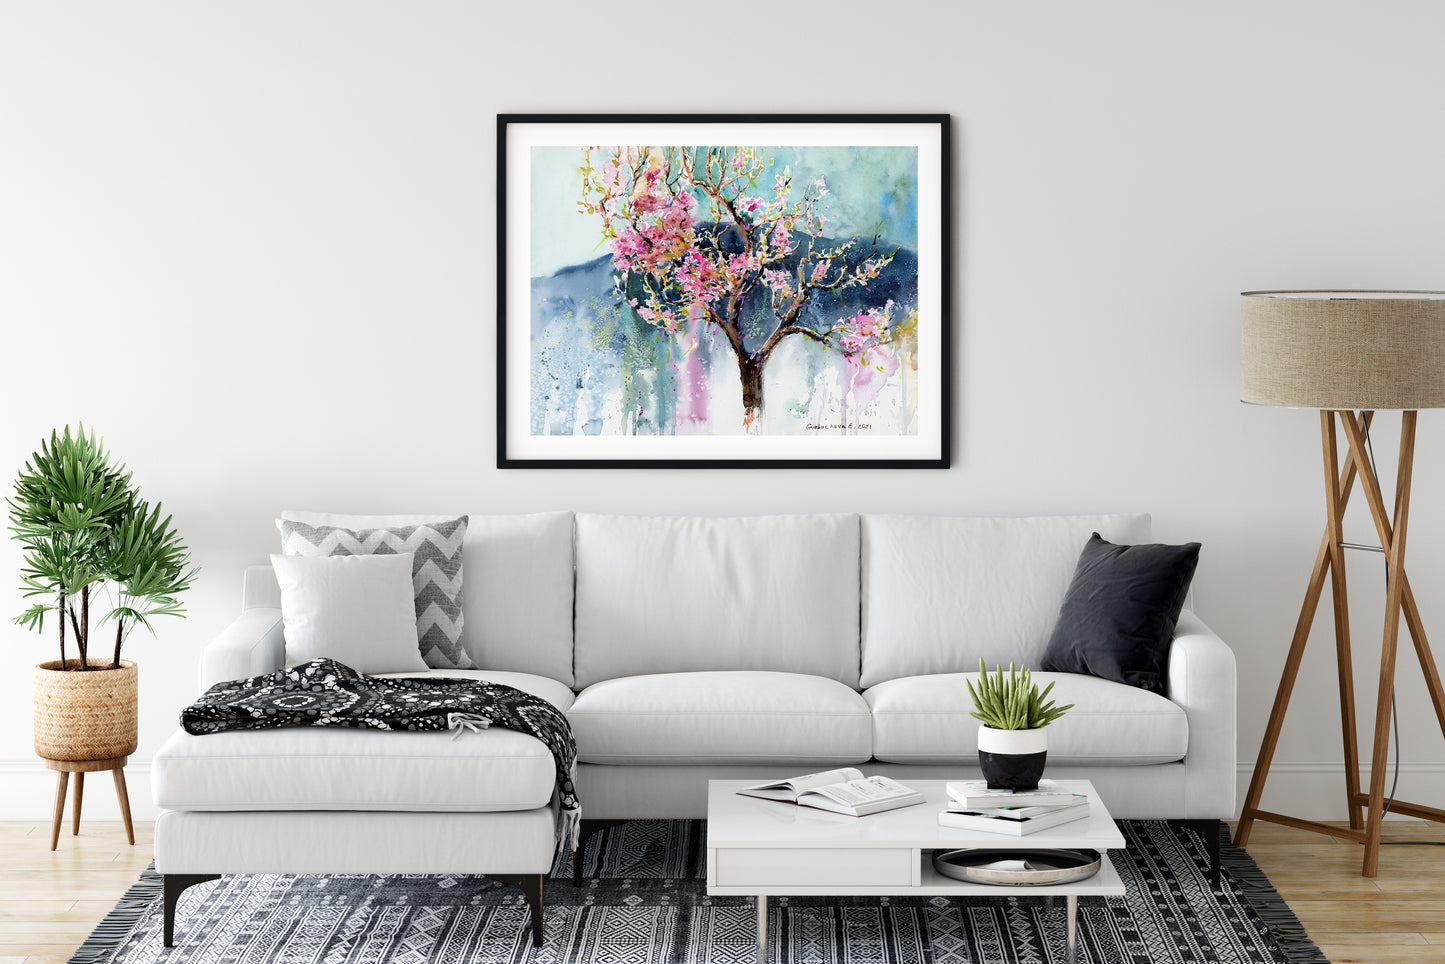 Pink Flower Tree Art Print, Botanical Watercolor Painting, Modern Sakura Wall Decor, Blooming Peach Blossom, Trees, Gift for House